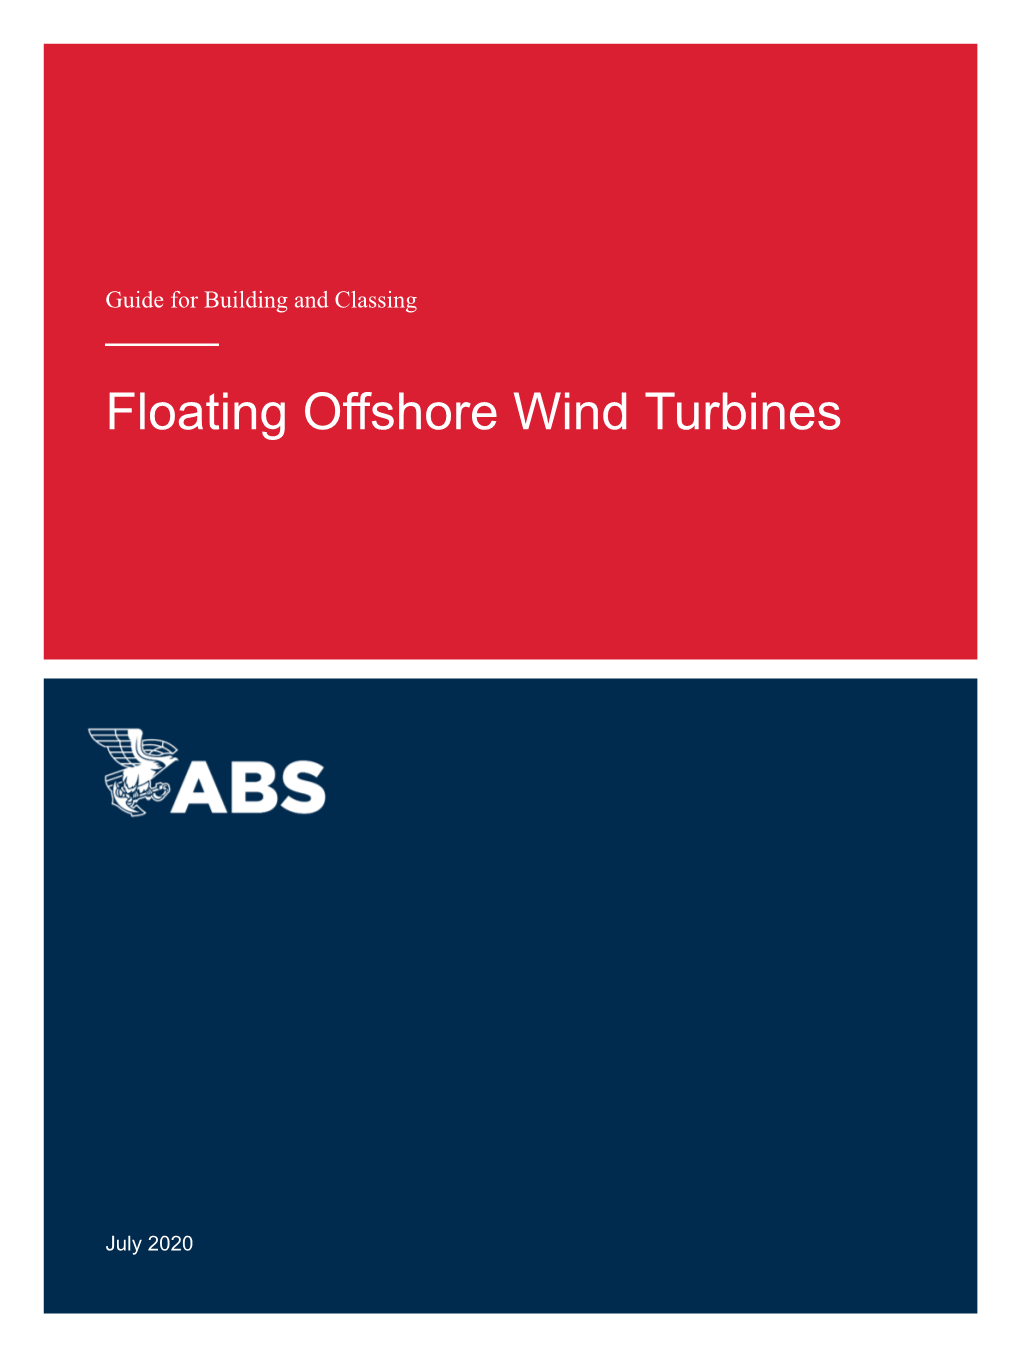 Guide for Building and Classing Floating Offshore Wind Turbines 2020